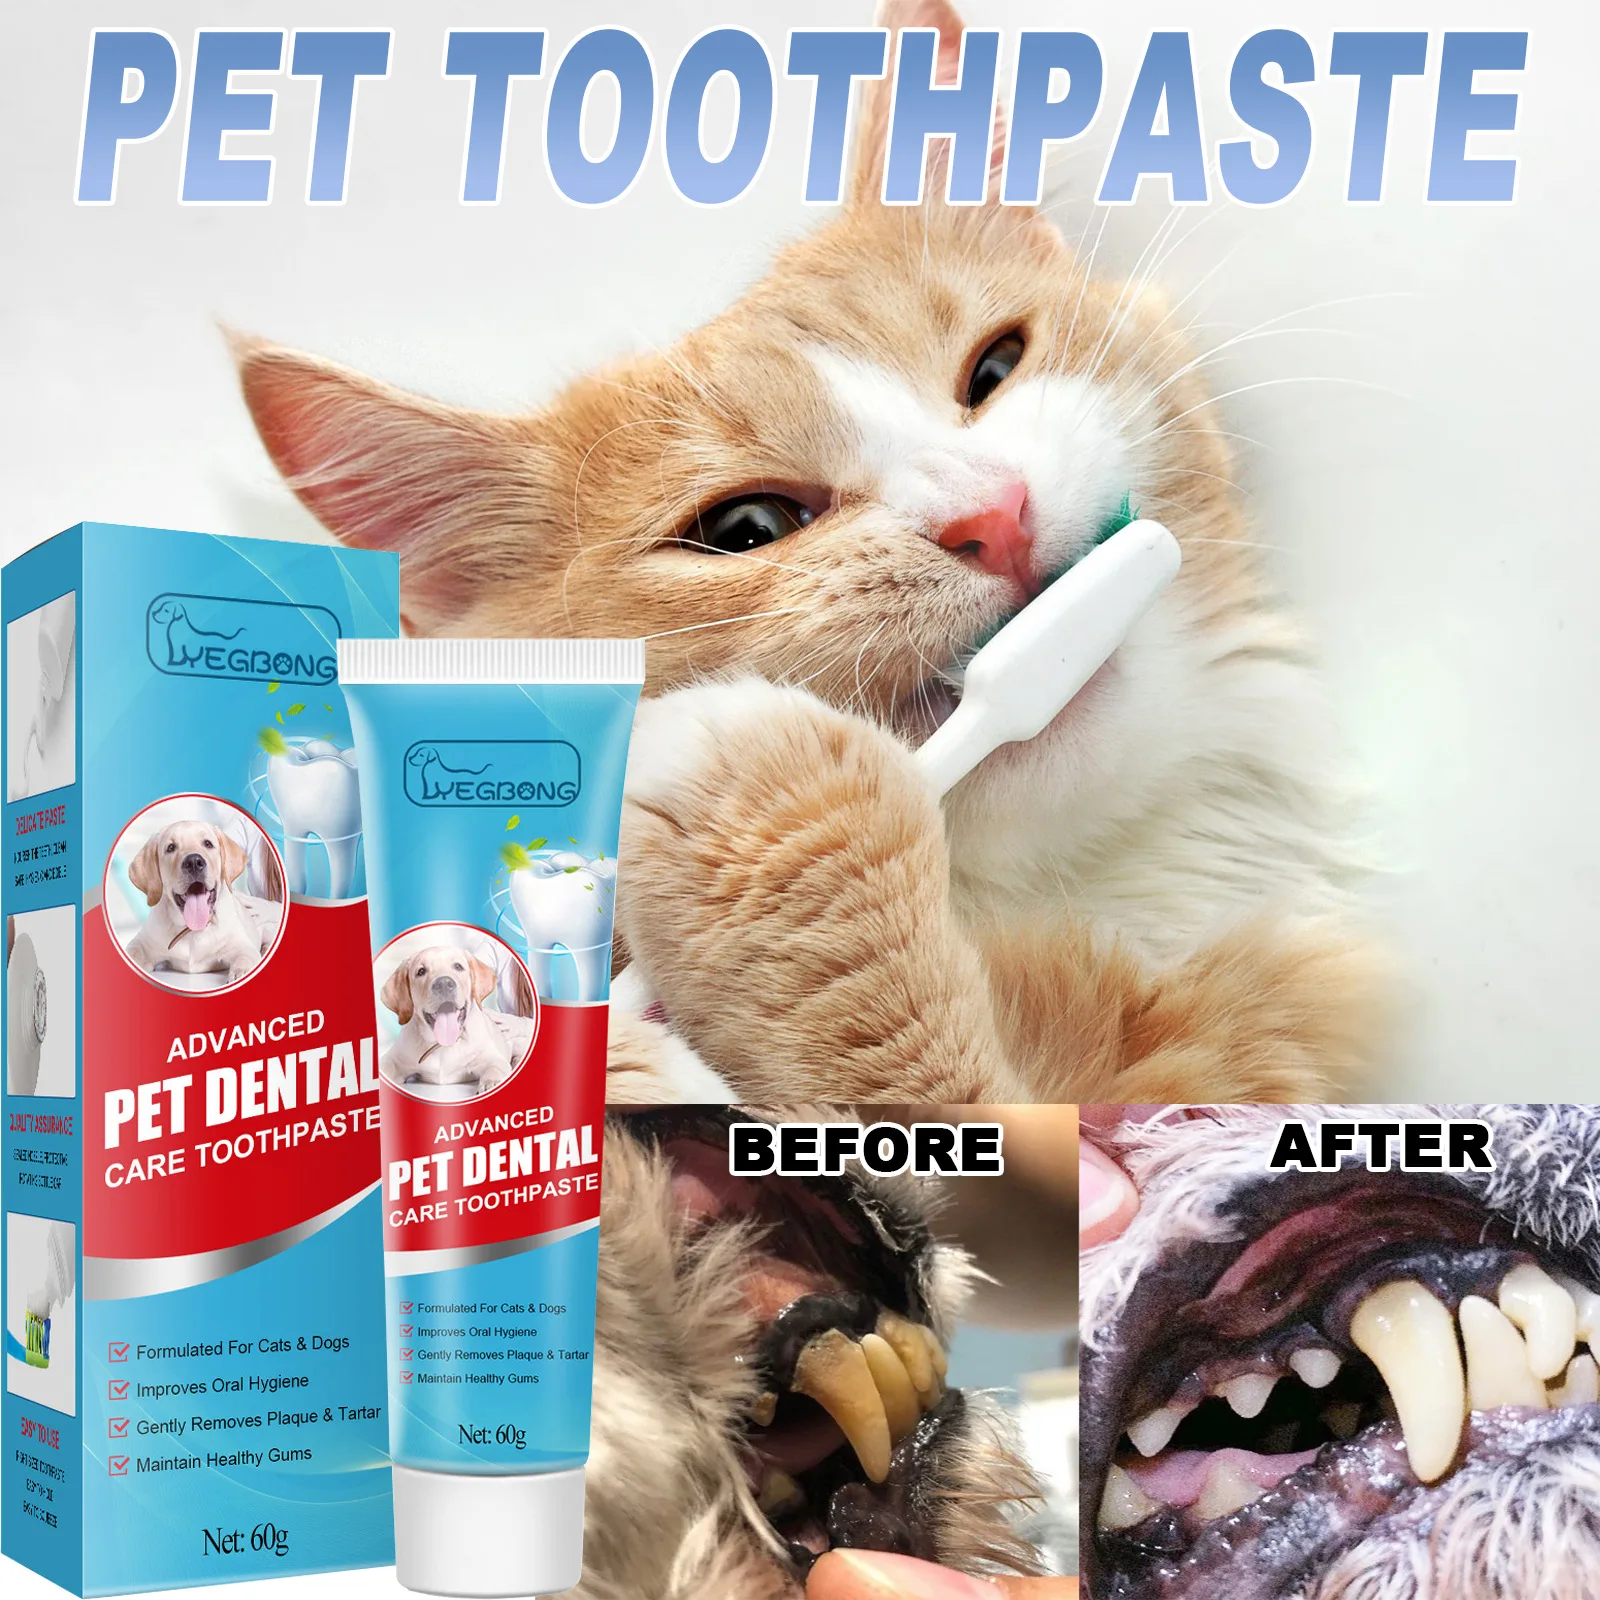 

Pet Toothpaste For Dogs Edible Helps Reduce Tartar Plaque Buildup Cleaning Prevent From Bad Breath Teeth Care Supplies Natural